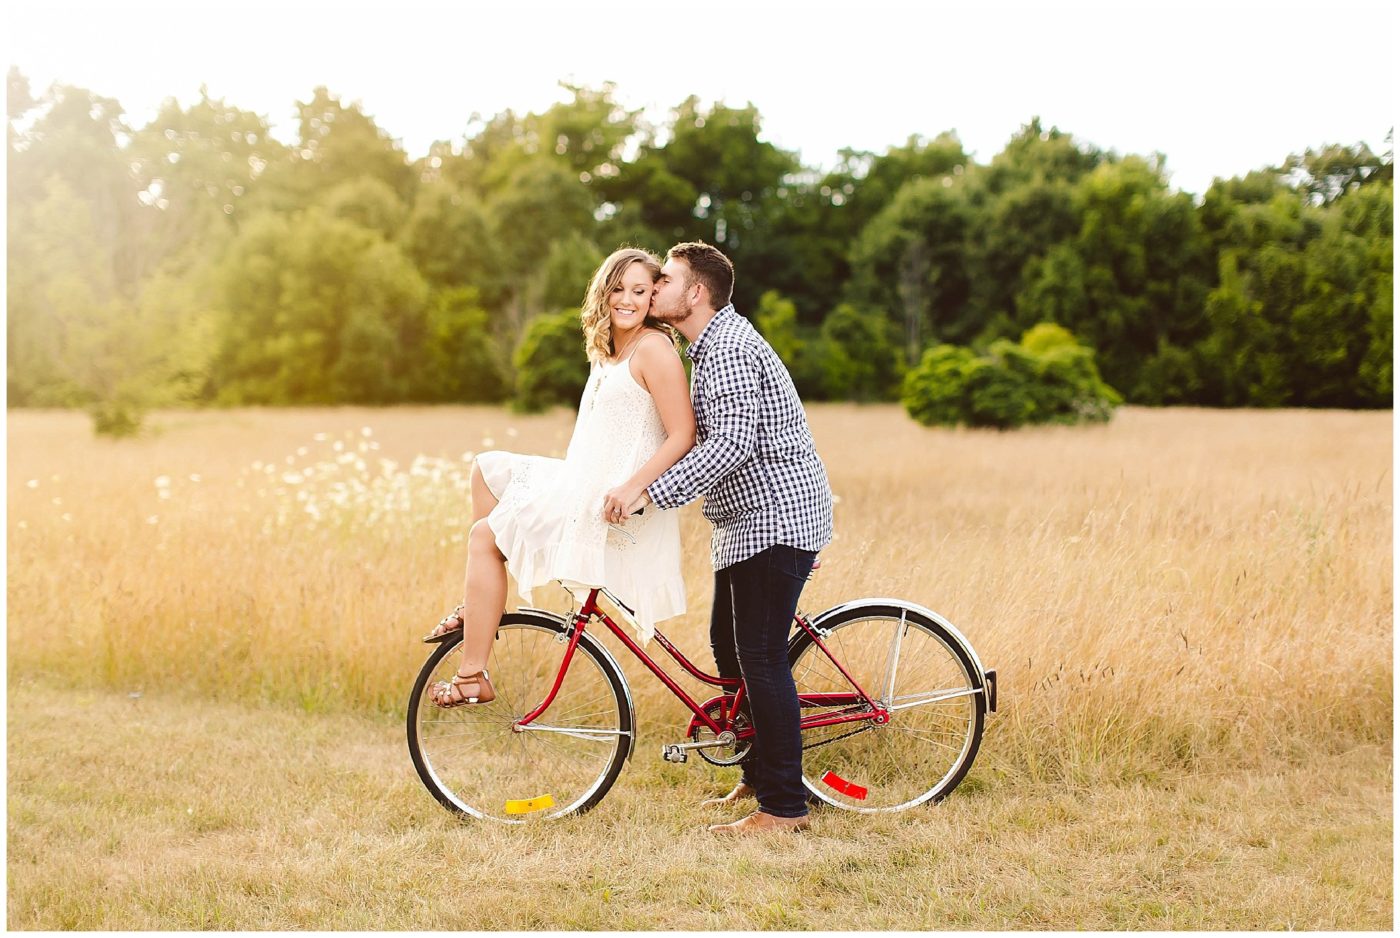 Adorable Bike Engagement Session in the Country, Fort Wayne Wedding Photography_0005